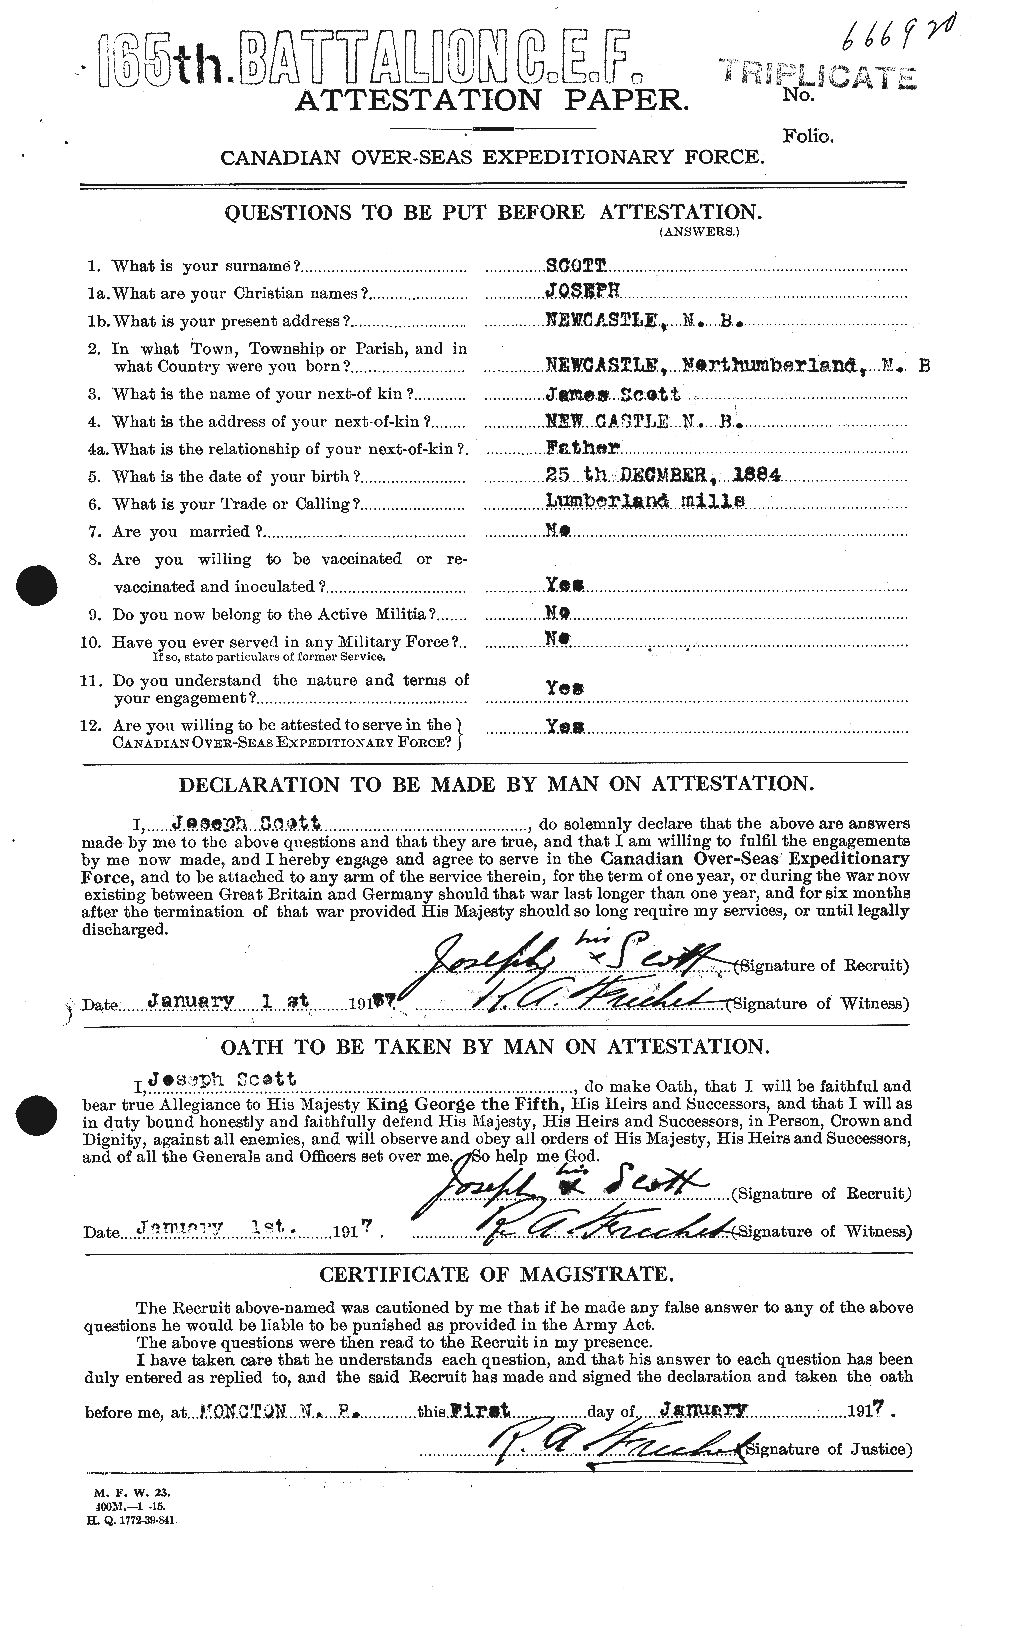 Personnel Records of the First World War - CEF 084177a